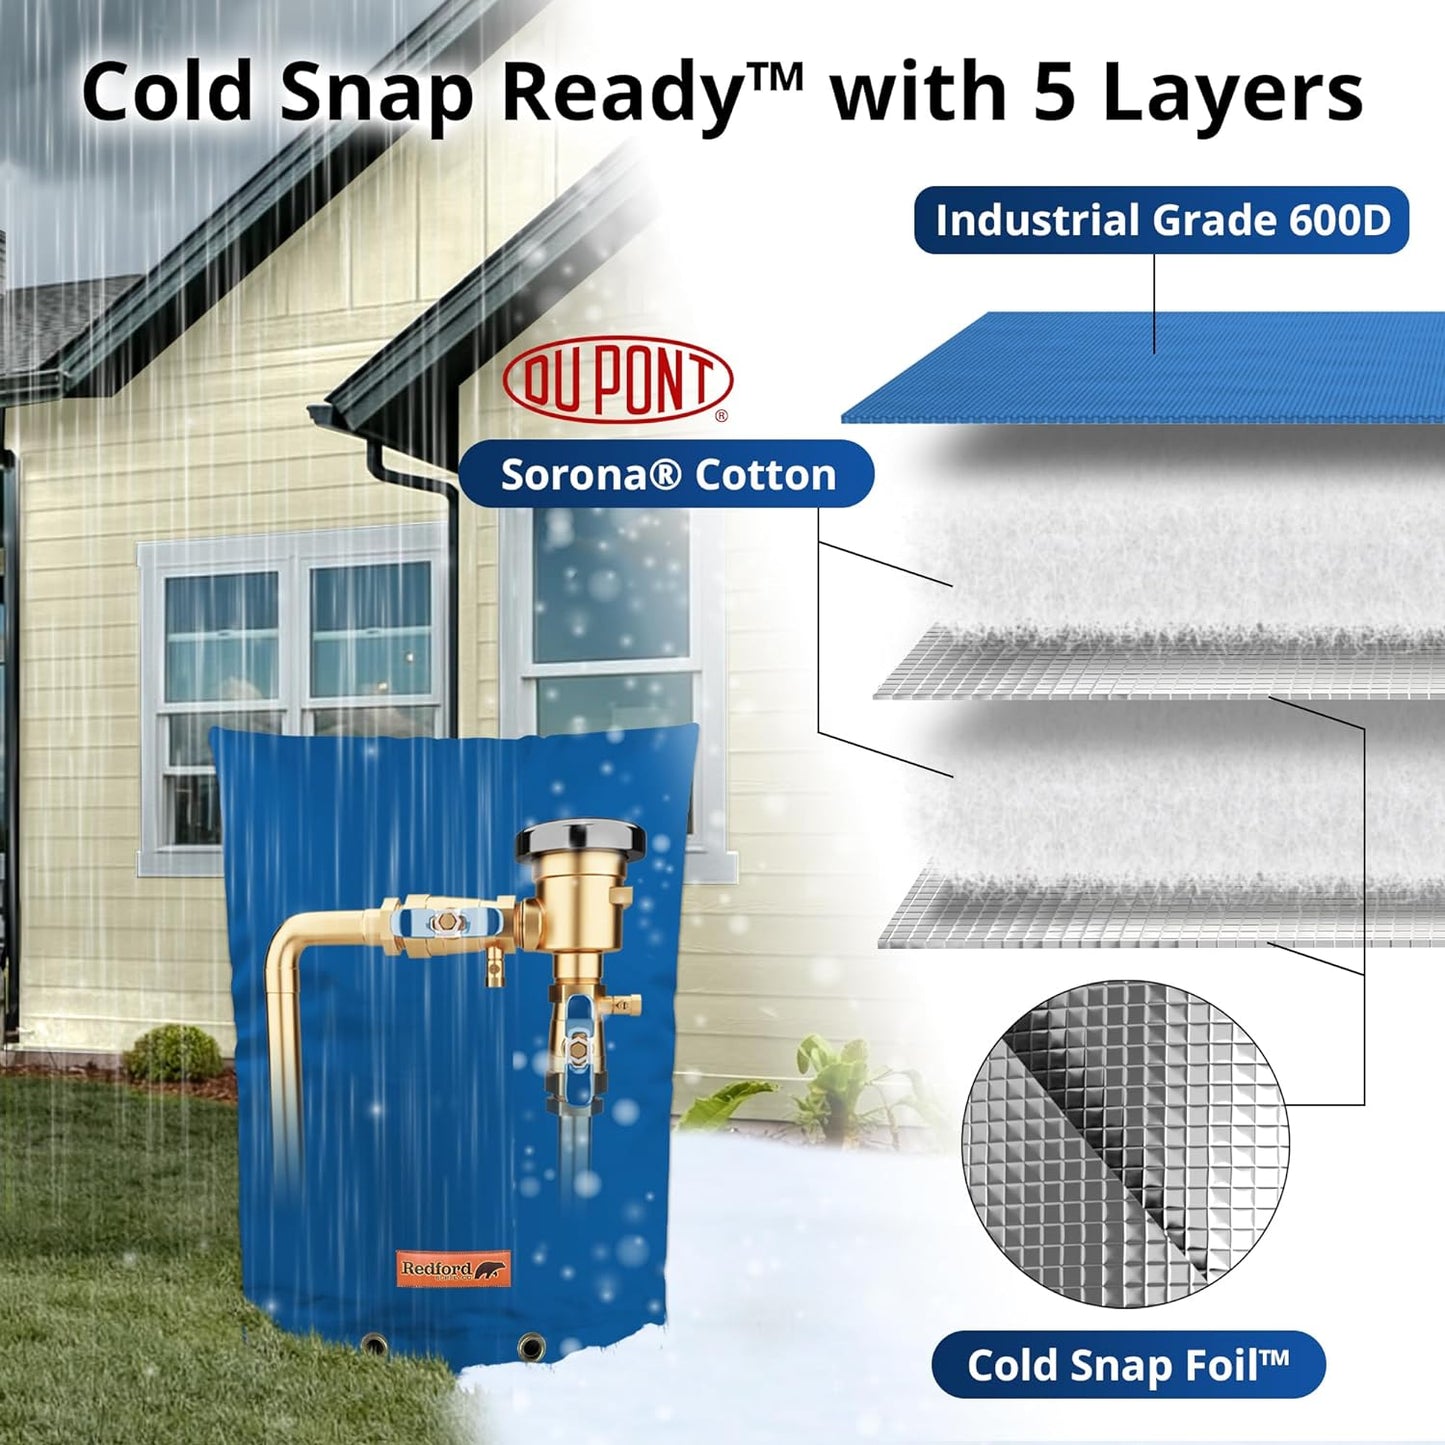 Cold Snap Double Wall™ Backflow Cover Prevents Costly Repairs Due to Freezing Weather - Easily Slips On and Off for Fast Concealment (Blue)